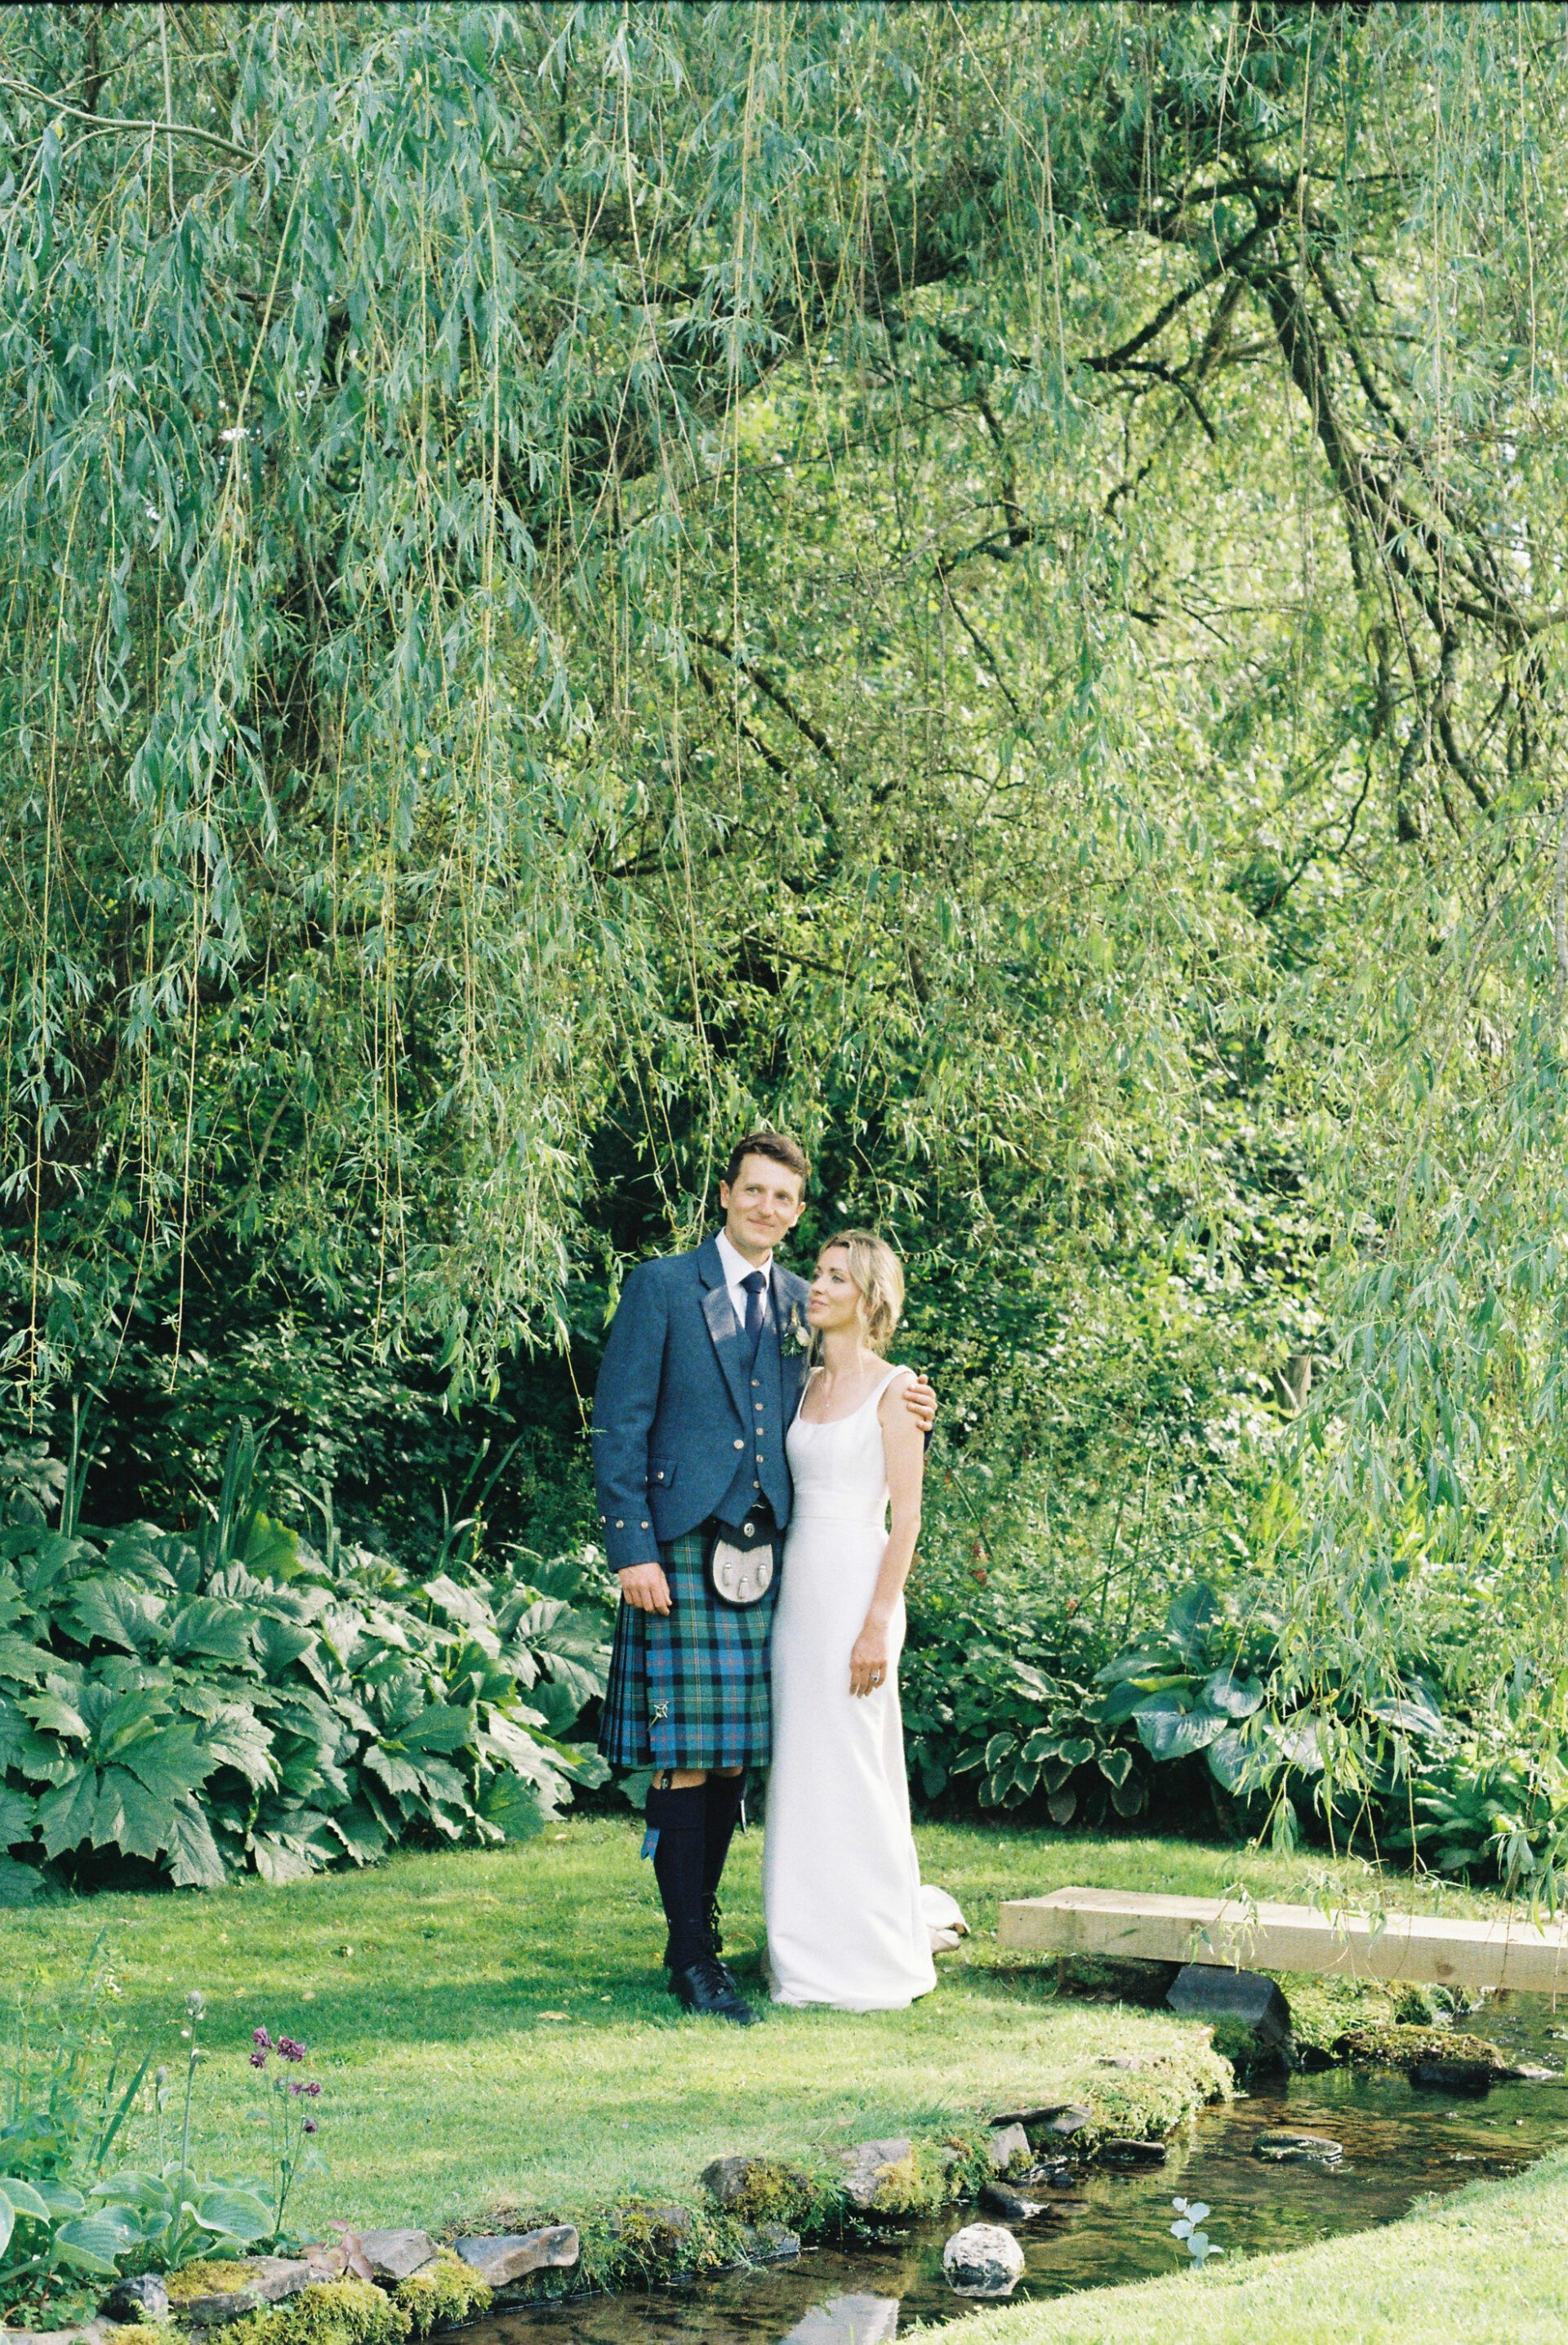 The bride and groom are captured on 35mm film during their couples portrait session